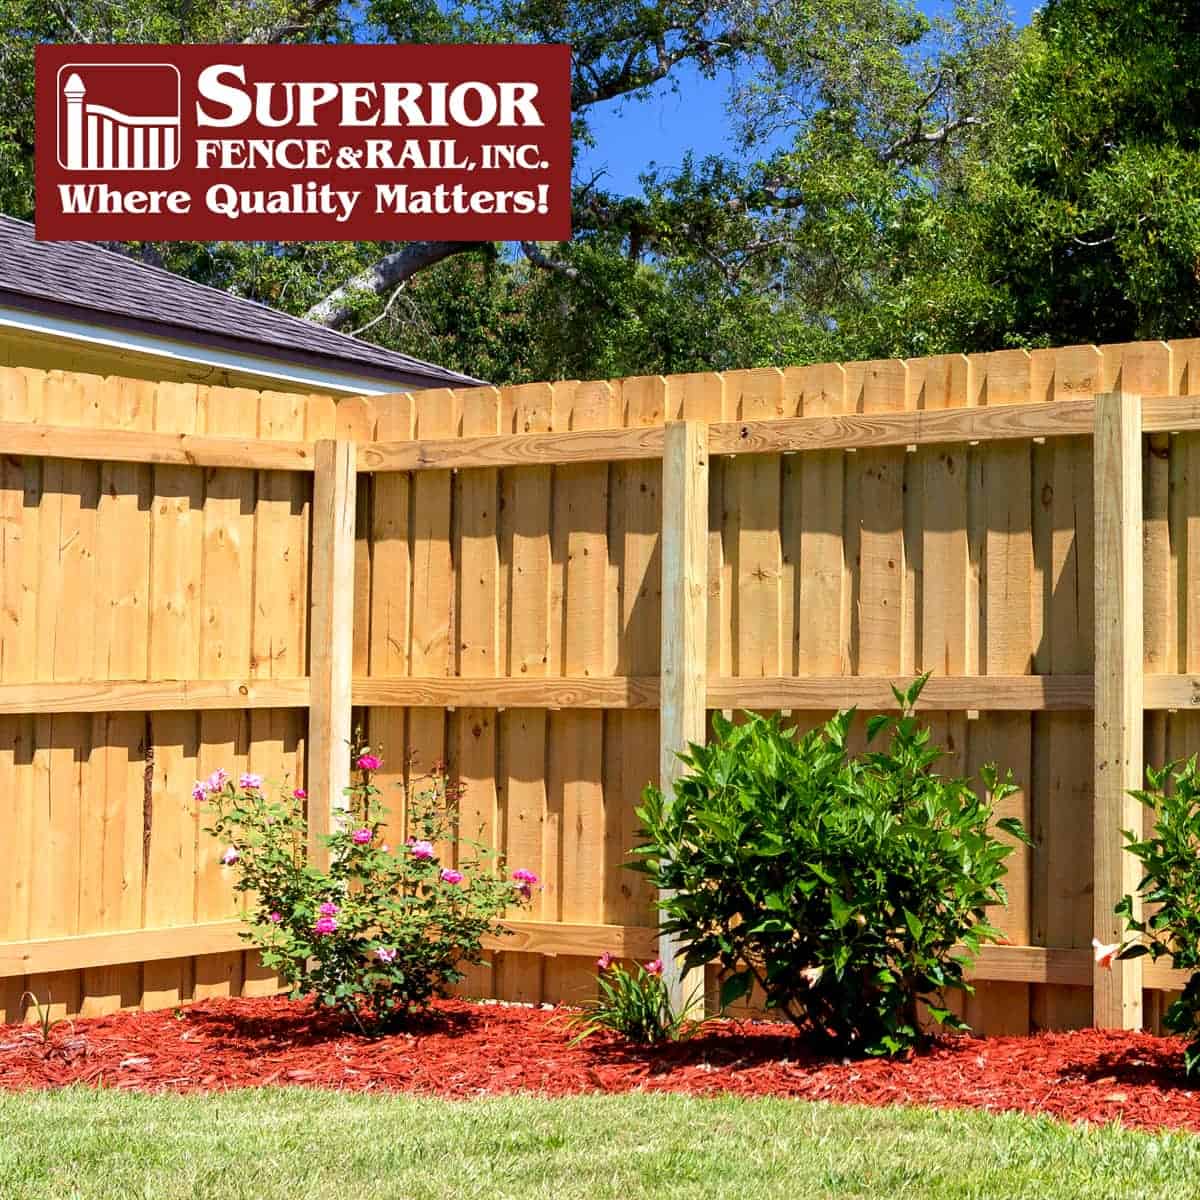 West Valley City Fence Company Contractor